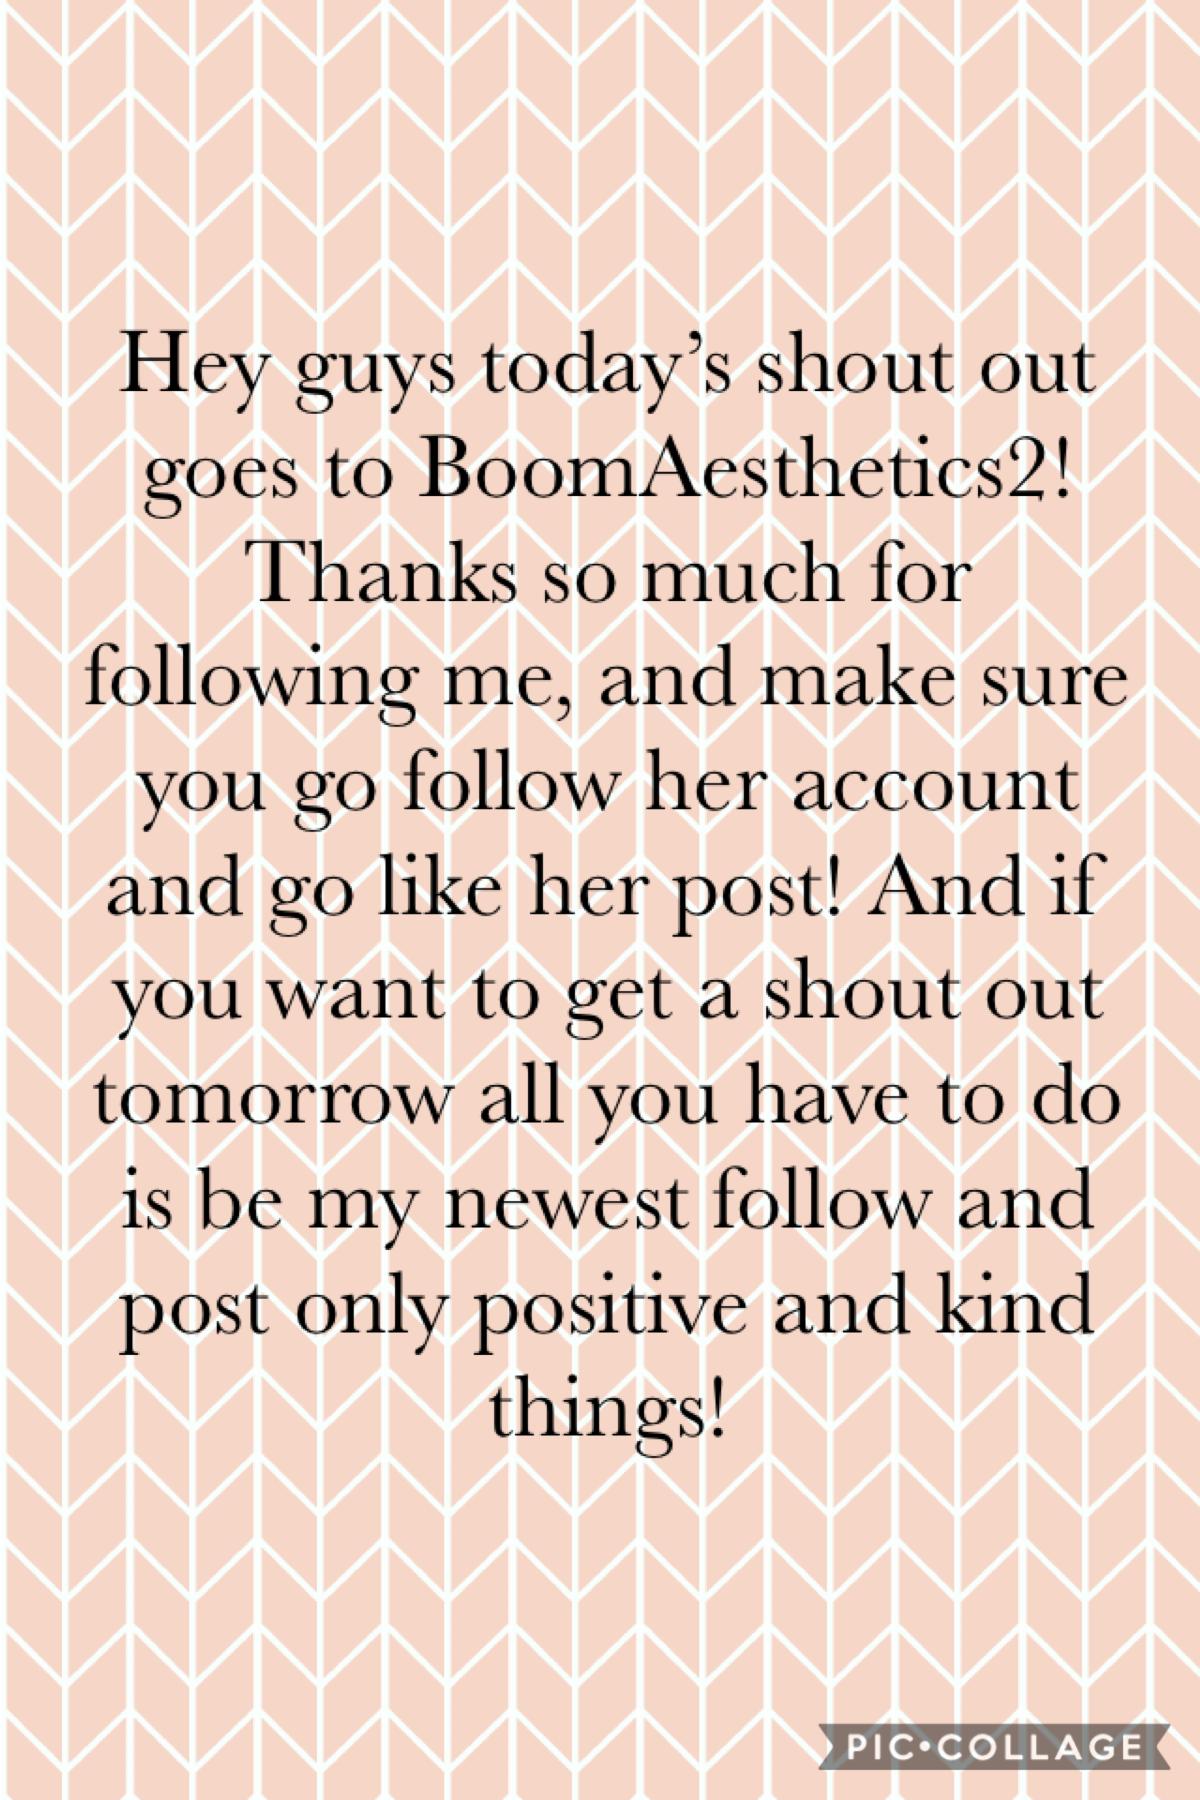 Make sure you are my newest follow to get a shout out tomorrow!